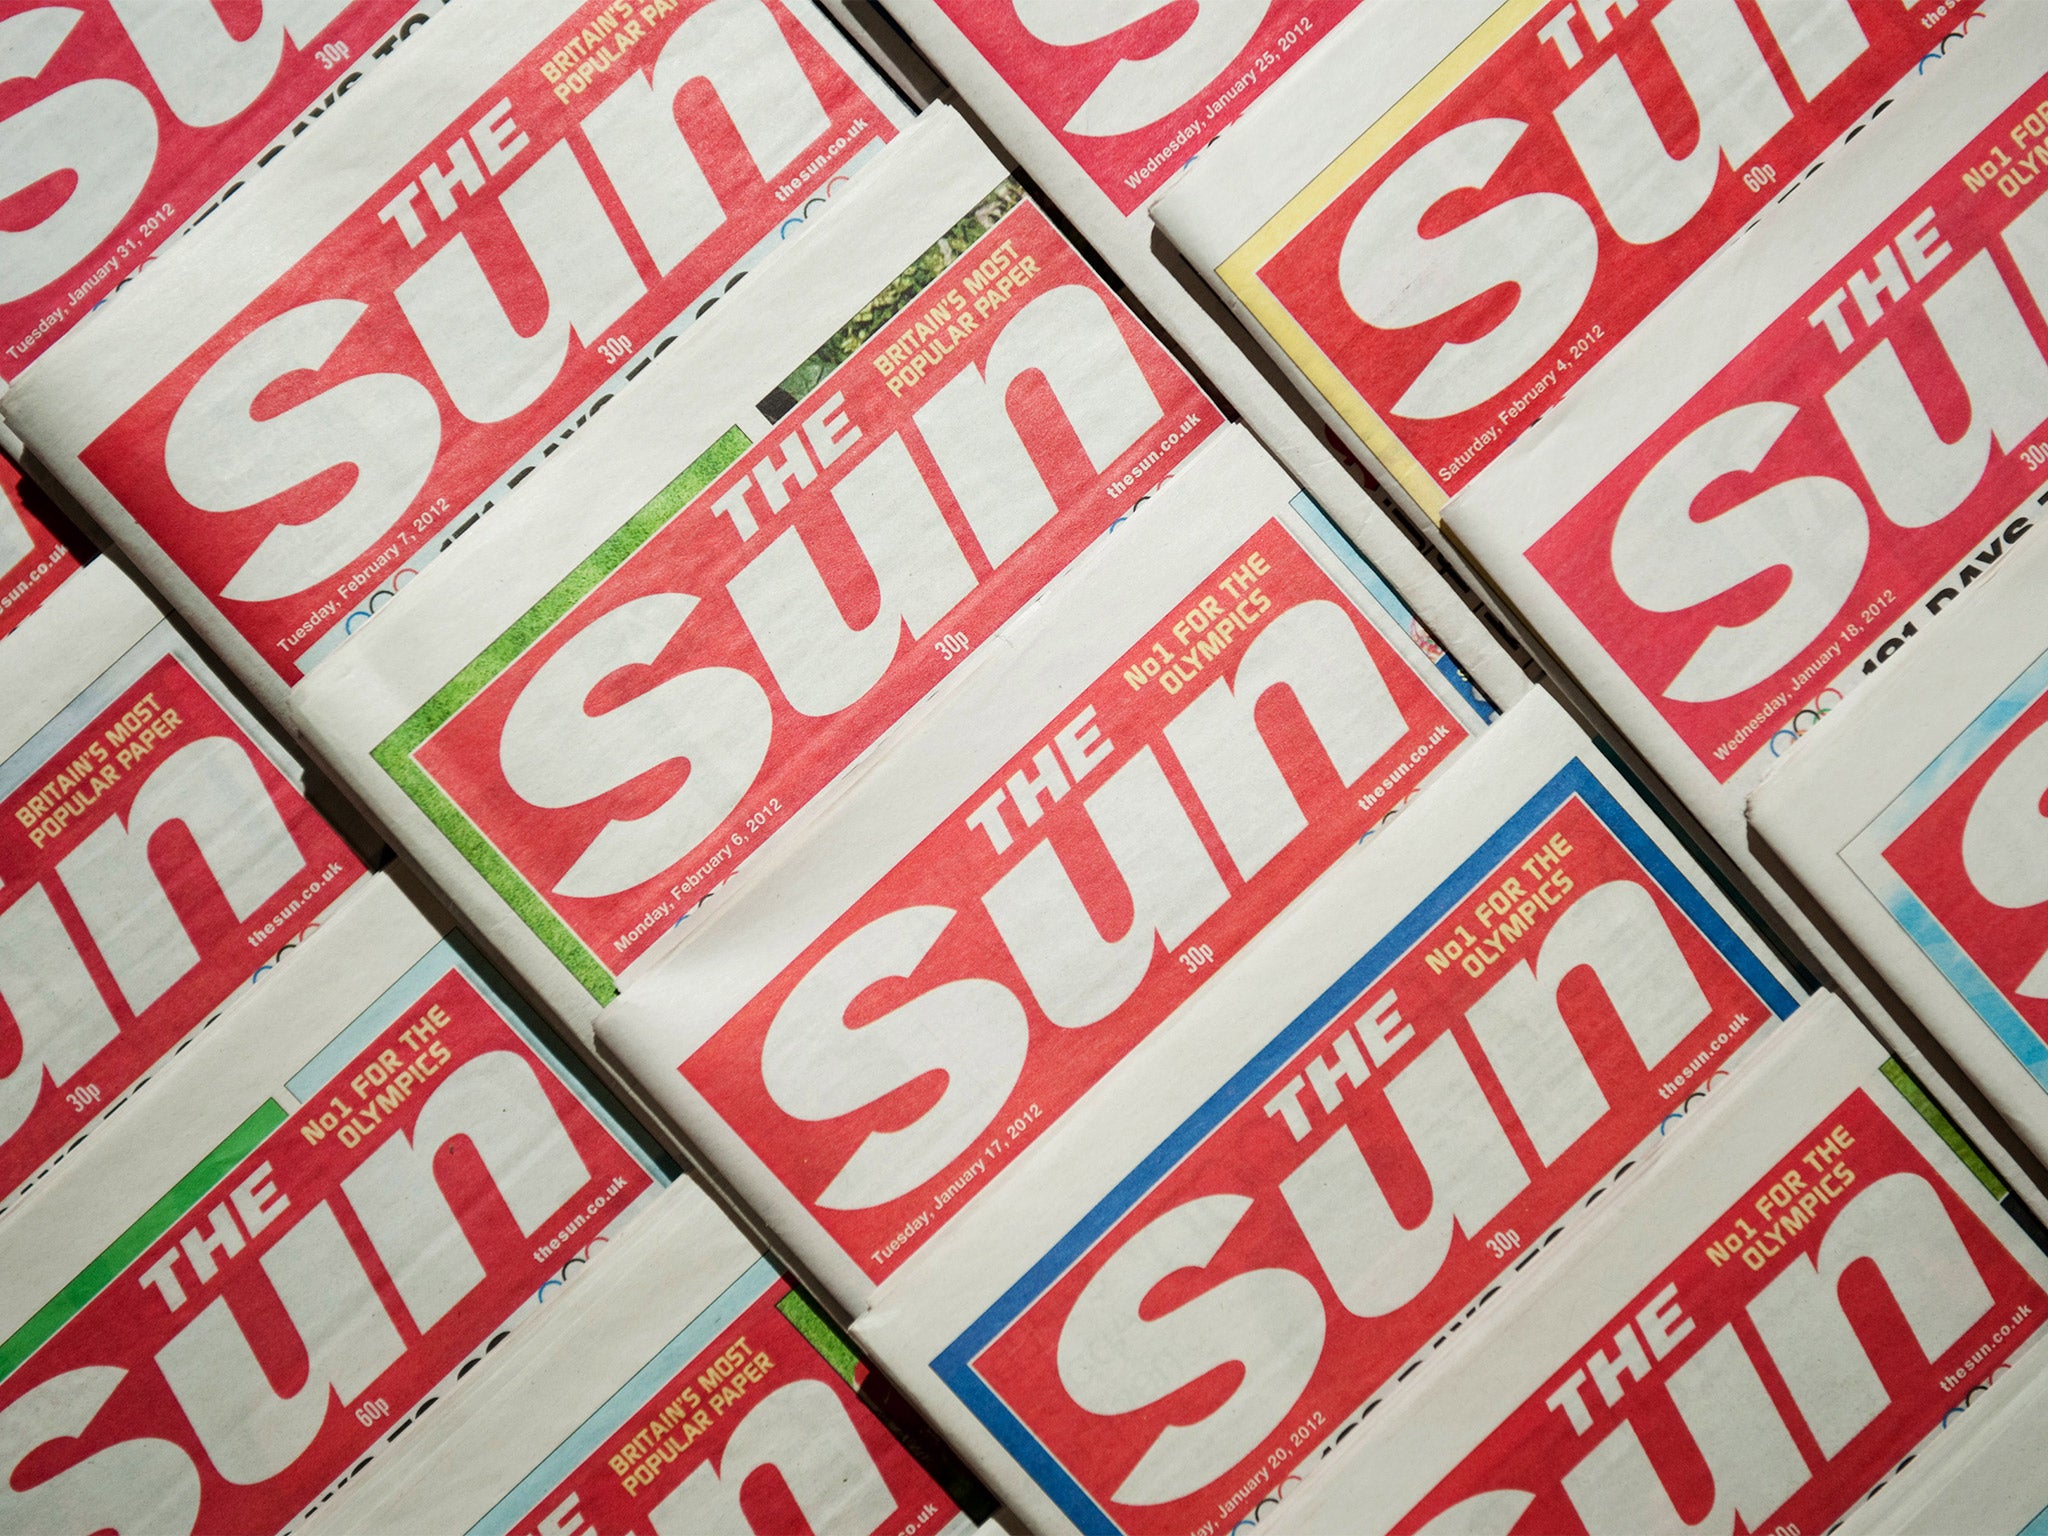 Shock tactics: Rupert Murdoch’s tabloid ‘The Sun’ received numerous complaints about its ‘sympathy for jihadis’ front page